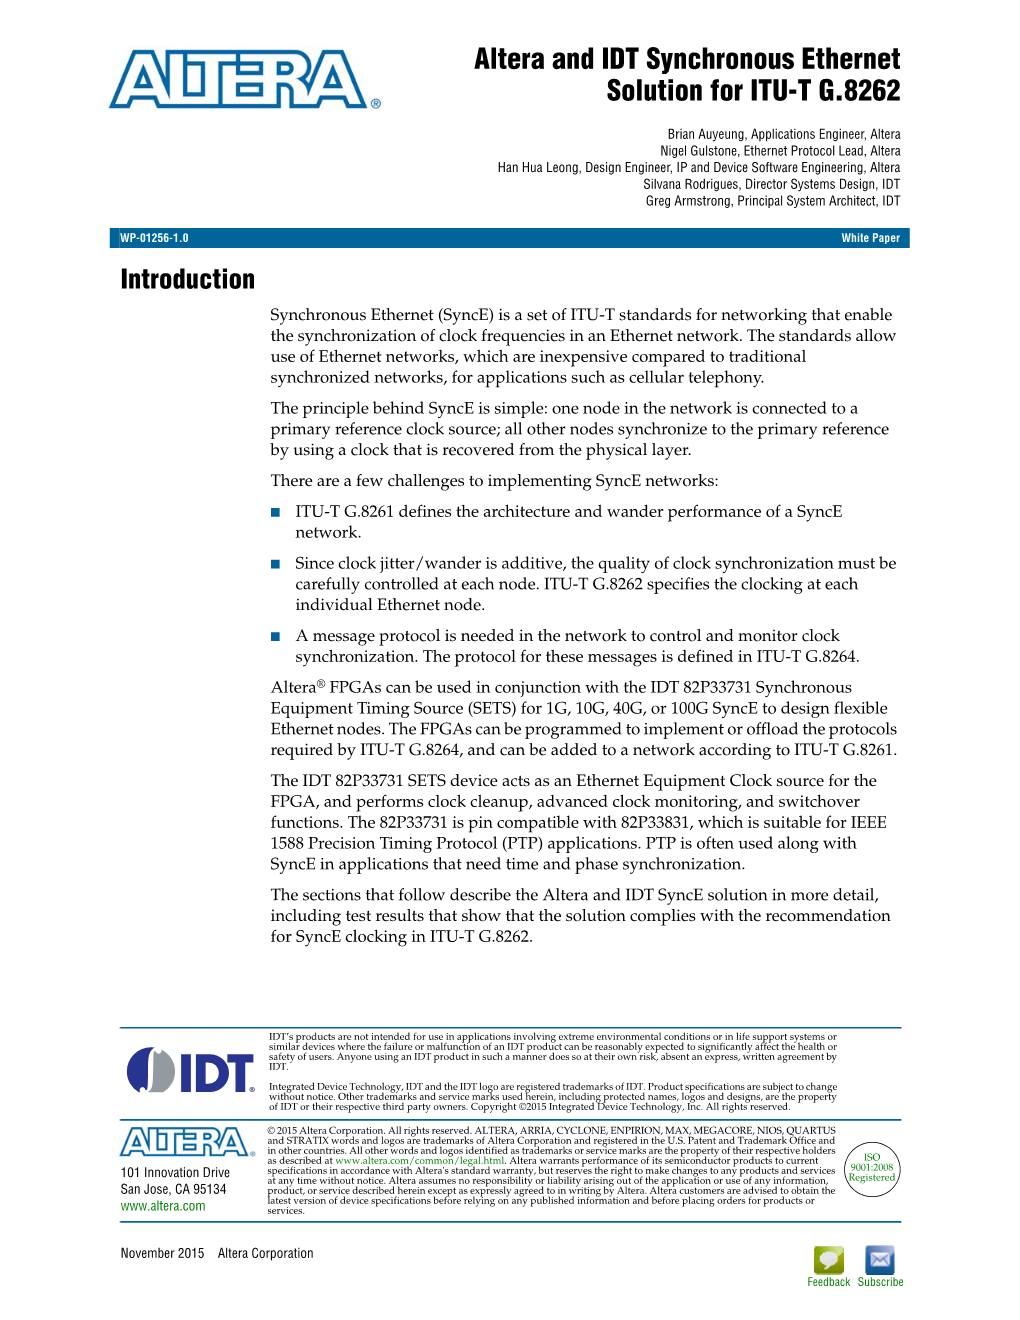 Altera and IDT Synchronous Ethernet Solution for ITU-T G.8262